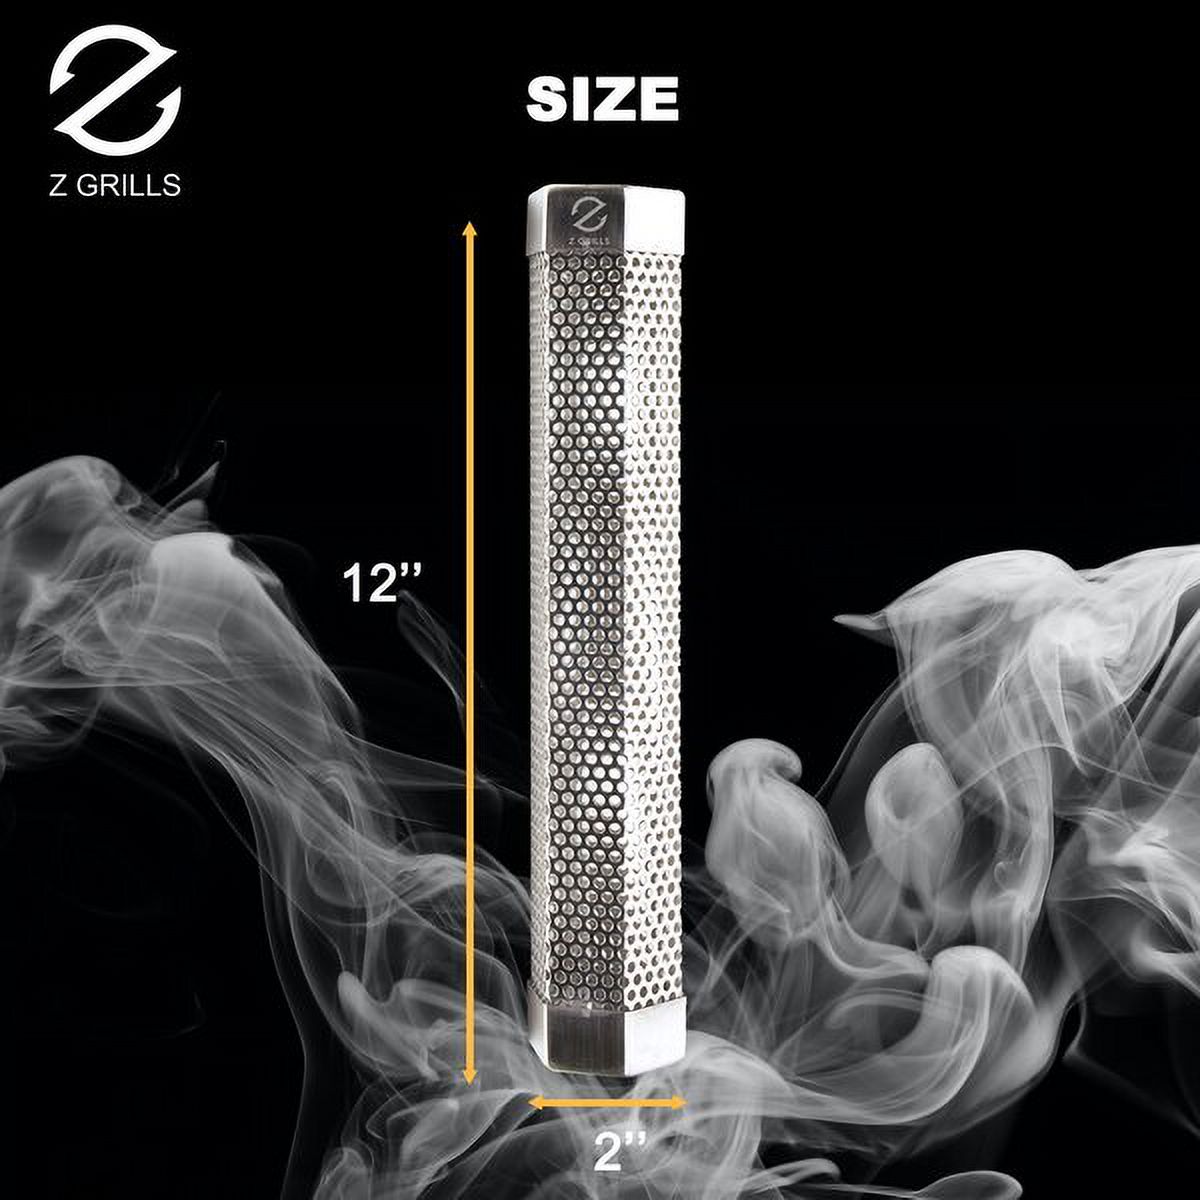 Z GRILLS Pellet Smoker Tube, 12'' Stainless Steel BBQ Wood Pellet Tube Smoker for Cold/Hot Smoking - image 5 of 5